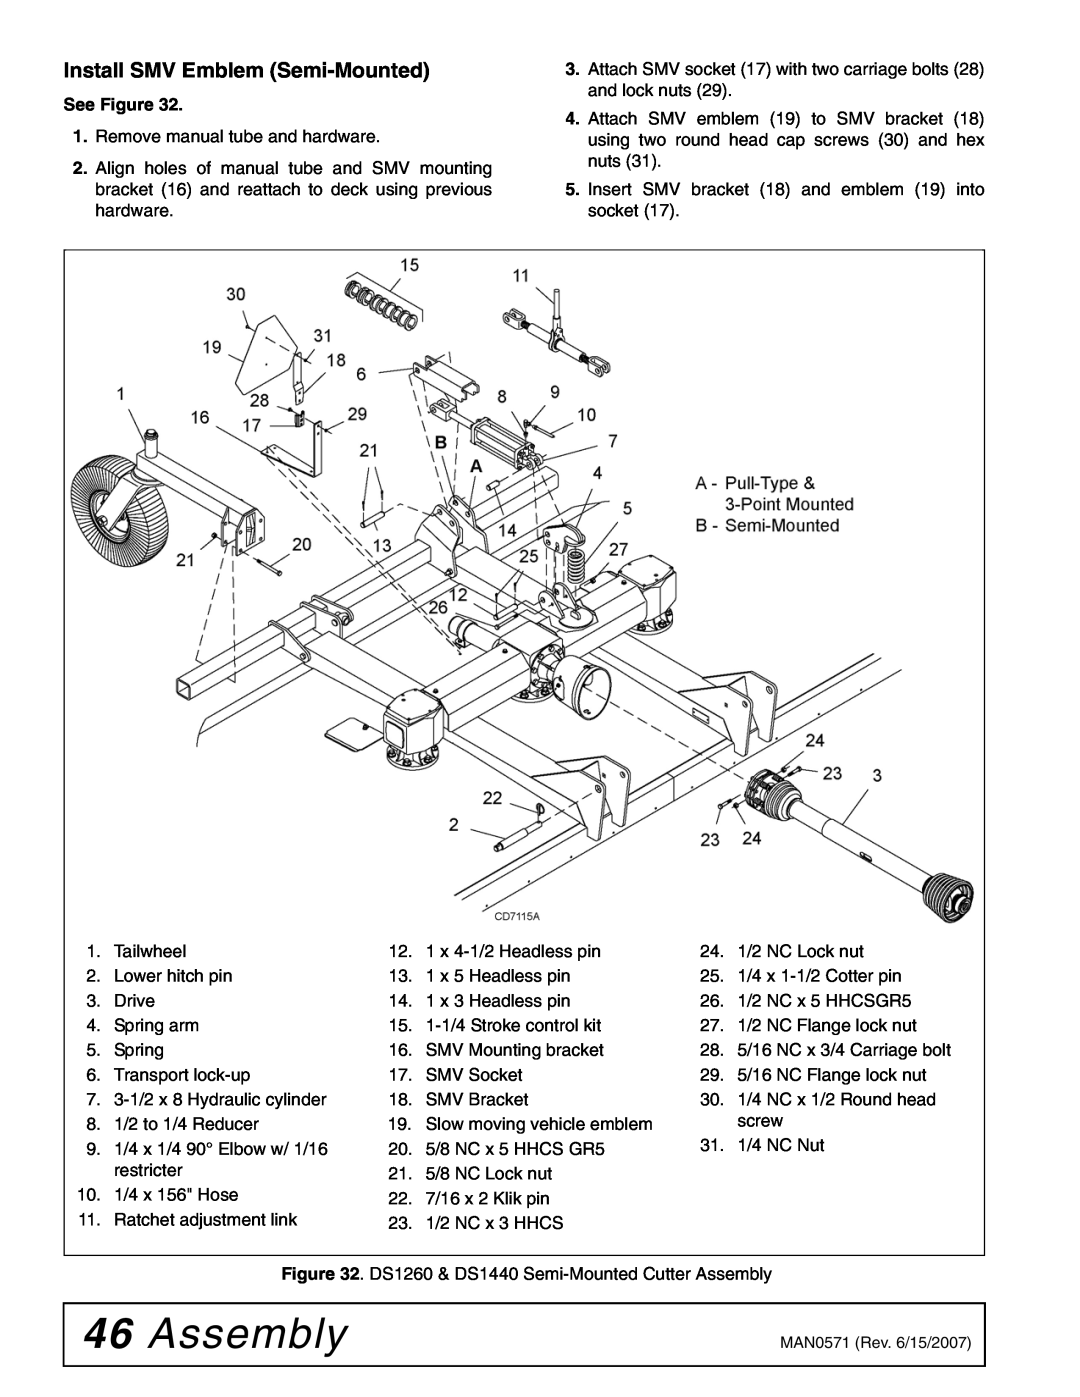 Woods Equipment DSO1260Q, DS1440Q, DS1260Q manual Assembly, Install SMV Emblem Semi-Mounted 